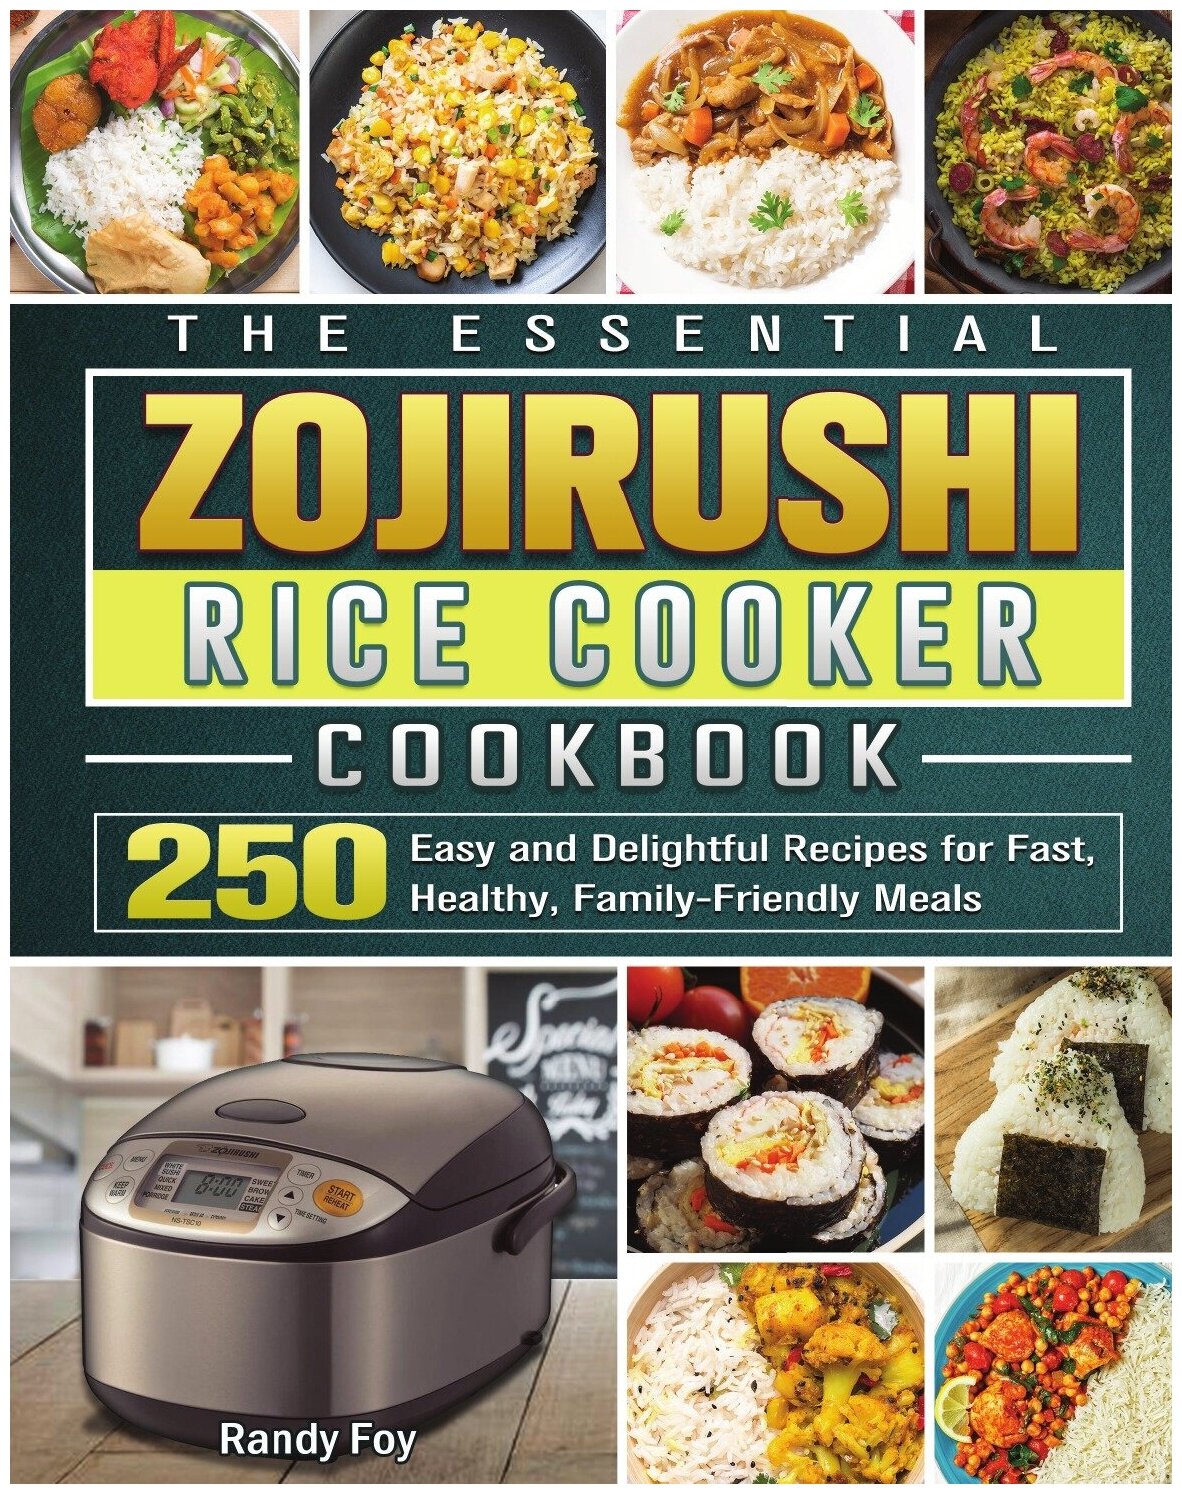 The Essential ZOJIRUSHI Rice Cooker Cookbook. 250 Easy and Delightful Recipes for Fast, Healthy, Family-Friendly Meals